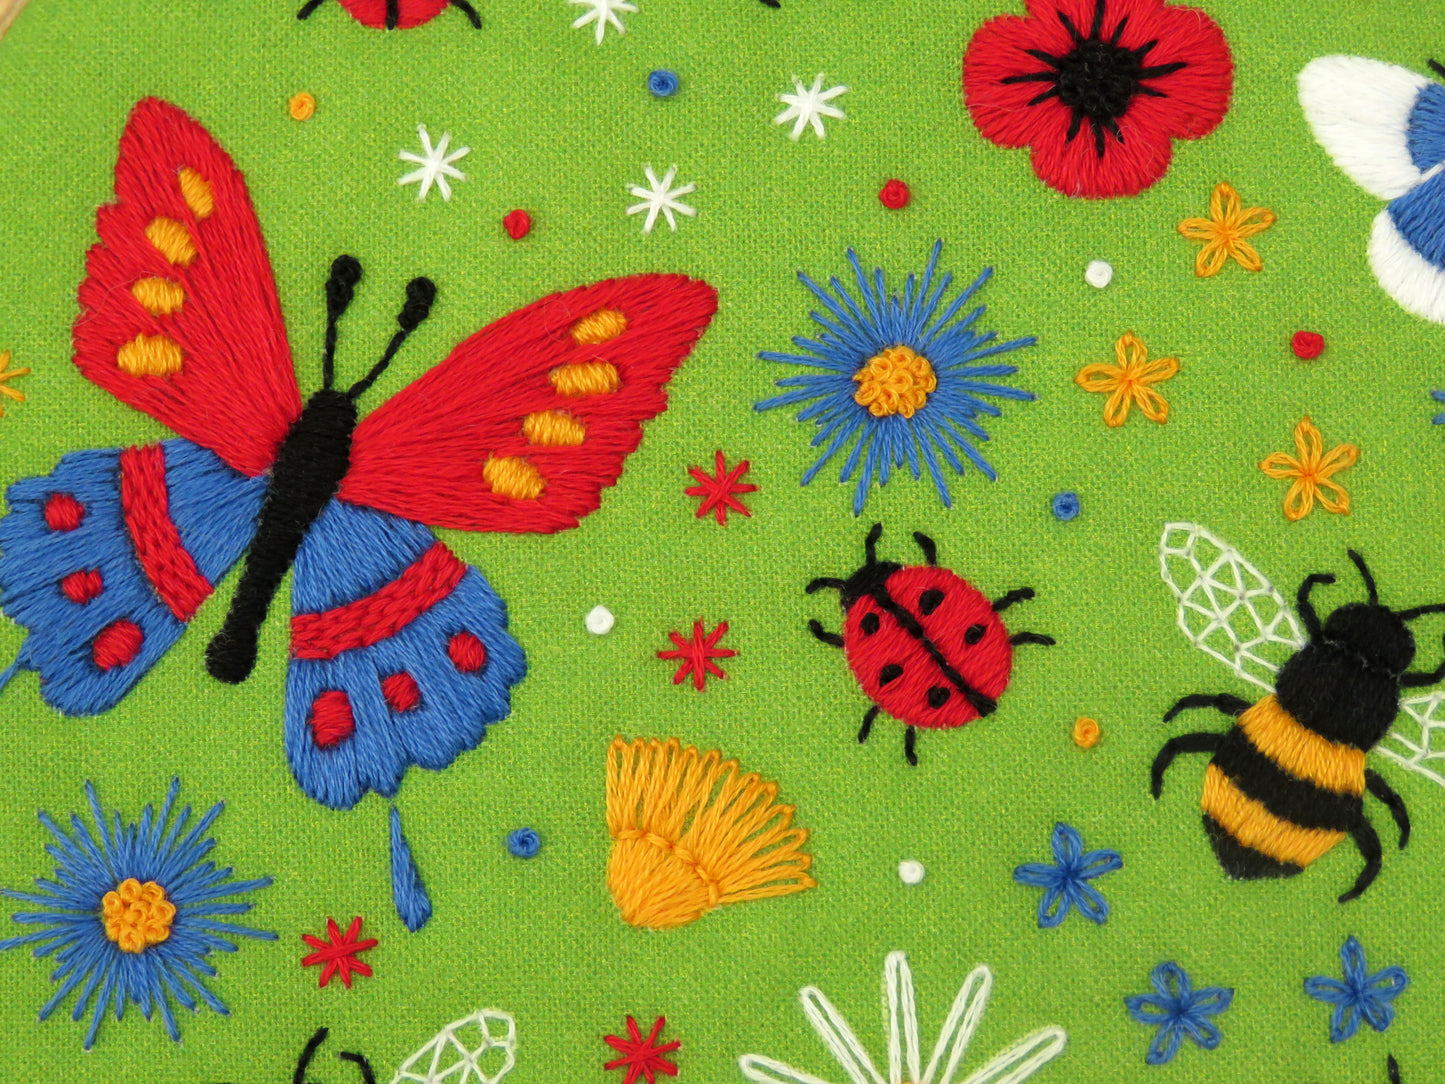 Butterflies and Bees Embroidery Fabric Pattern Pack - Fabric Packs - ohsewbootiful